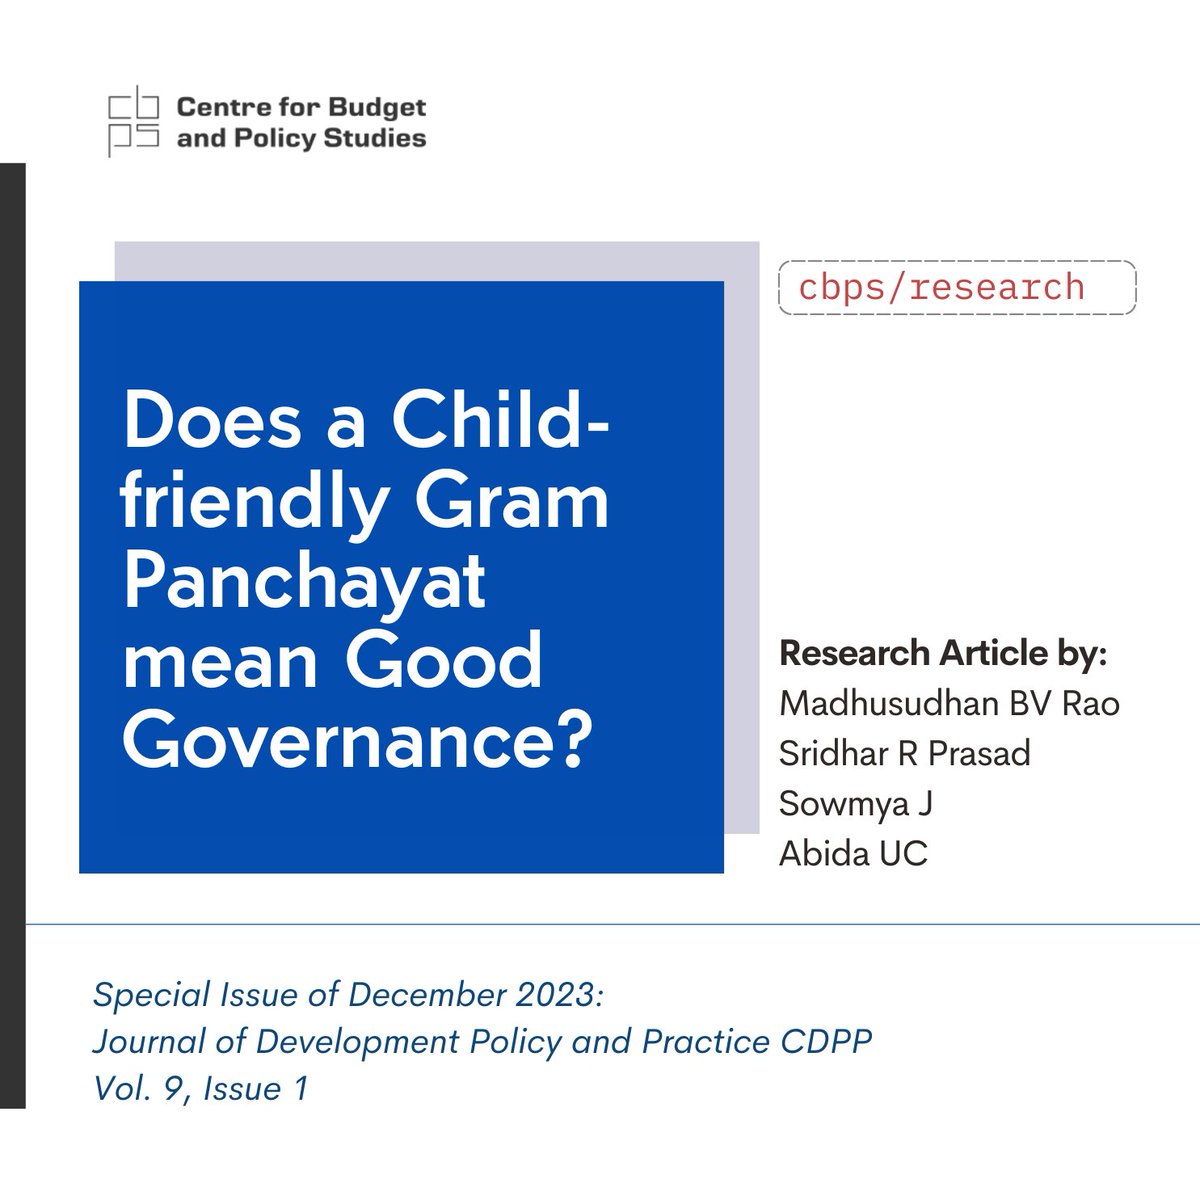 #ResearchArticle | CBPS conducted an analysis of 10 gram panchayats in Karnataka to understand what makes a #grampanchayat child-friendly. The study extends the framework to explore how processes can improve the overall governance. 

Find the article here:
journals.sagepub.com/doi/abs/10.117…